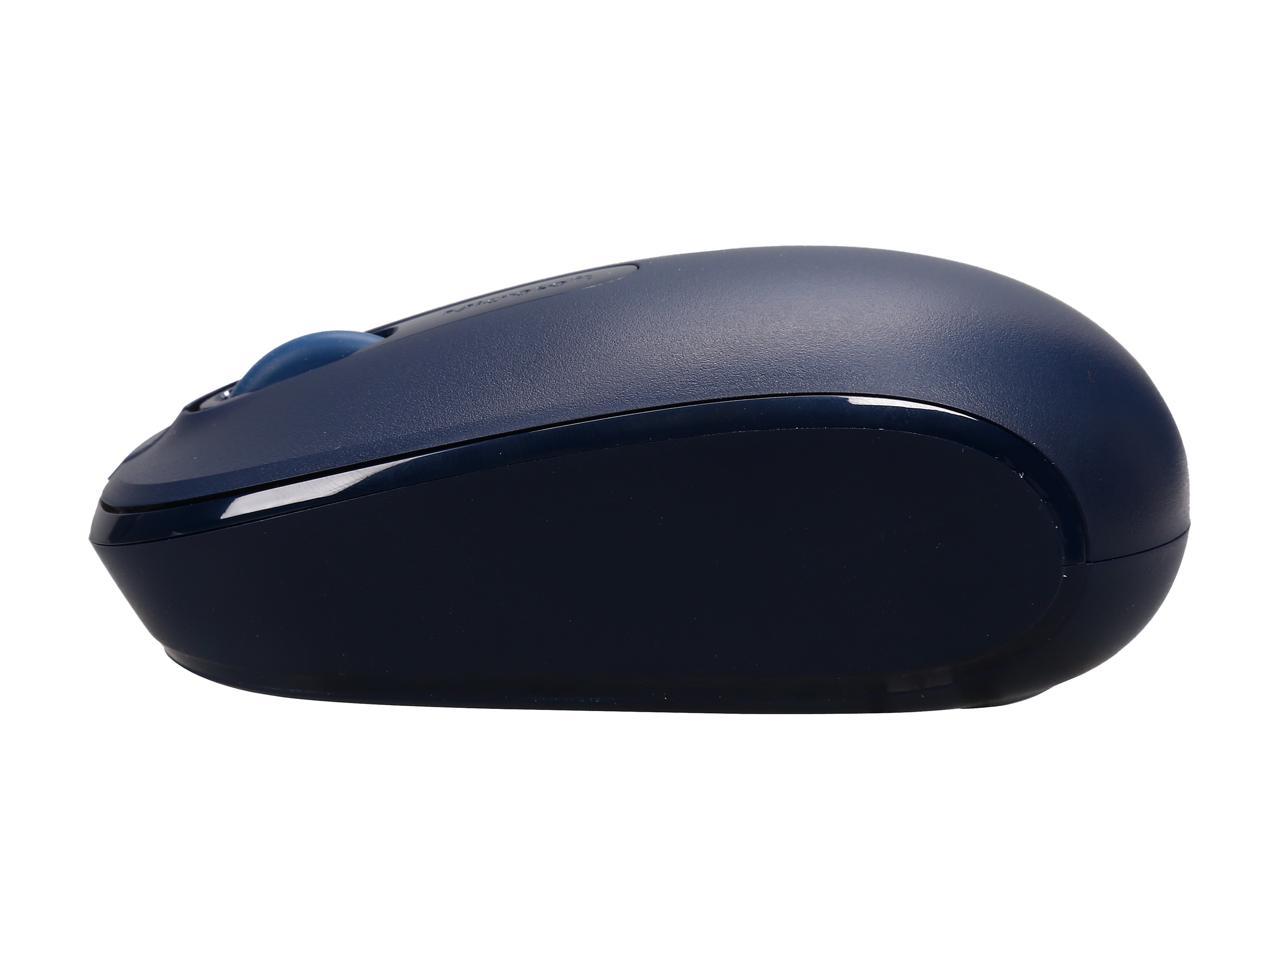 microsoft wireless mouse 1000 scrolling erraticly